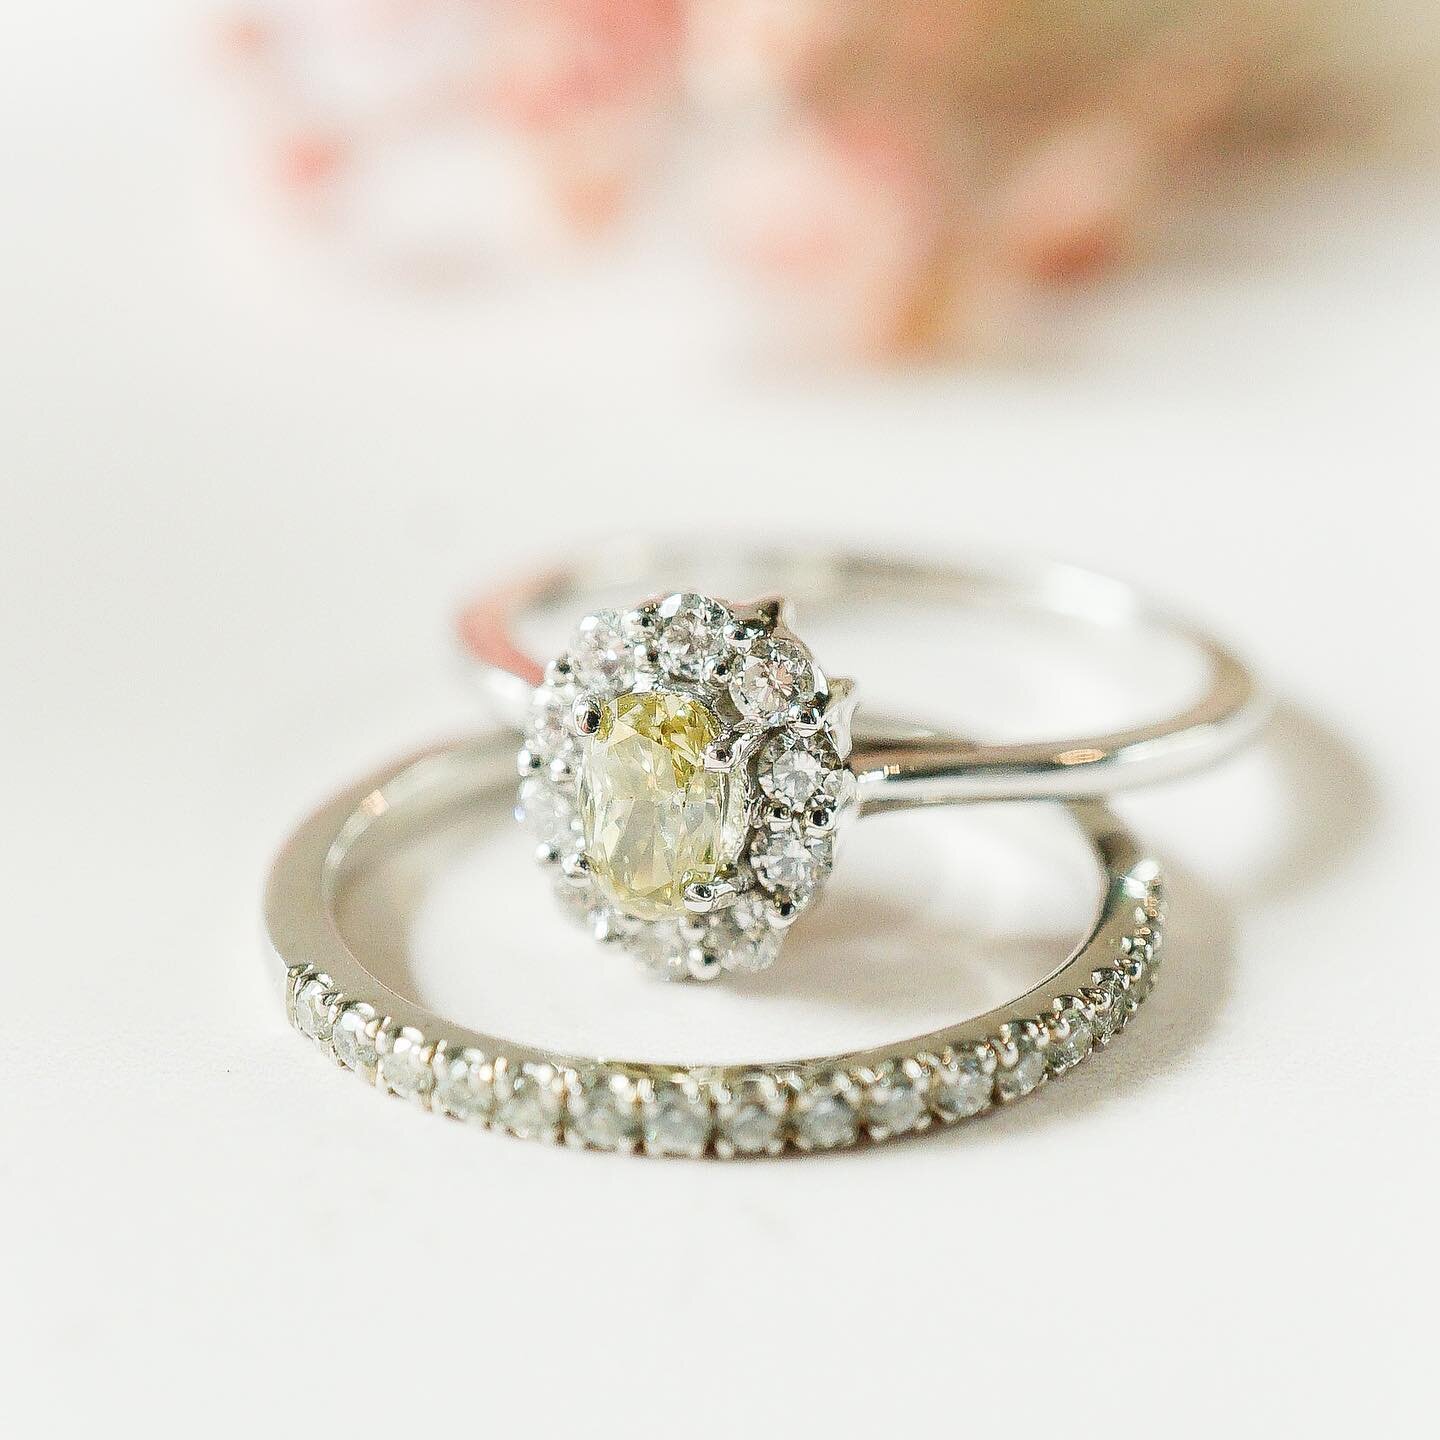 Our versatile Eternity Ring and our Oval Yellow Diamond in Halo Setting Ring - a matchless pair reserved as a timeless treasure to own..